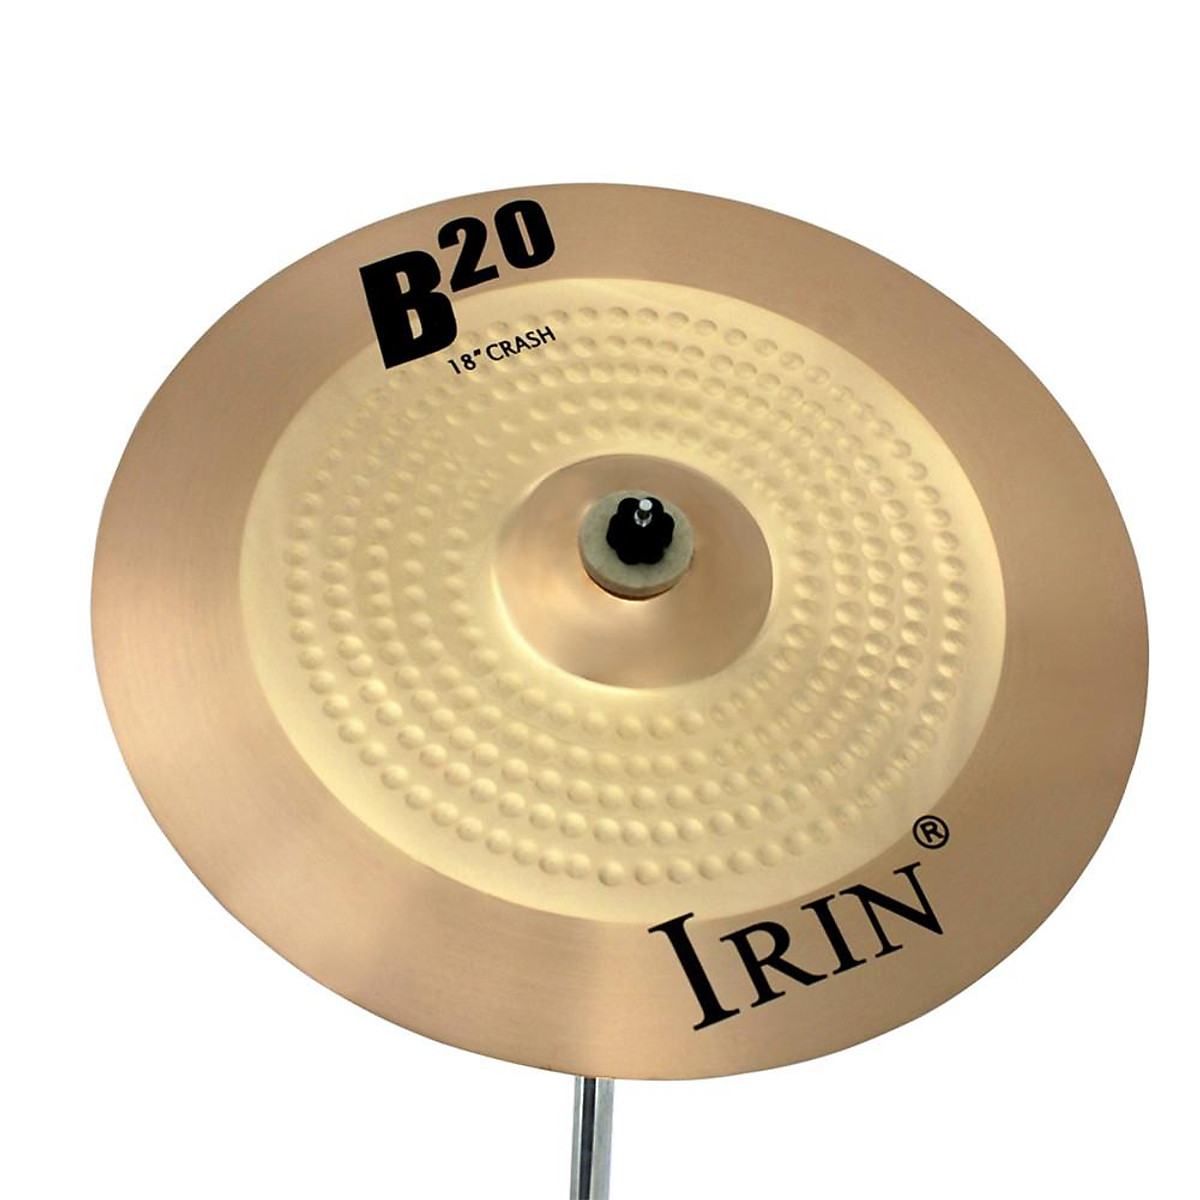 18-inch Cymbal Strong Sound Cymbal Set High-pitched Cymbal Hanging Rub  Oblique Cymbal Rack Fork Bracket Drum Kit Cymbals 楽器アクセサリー